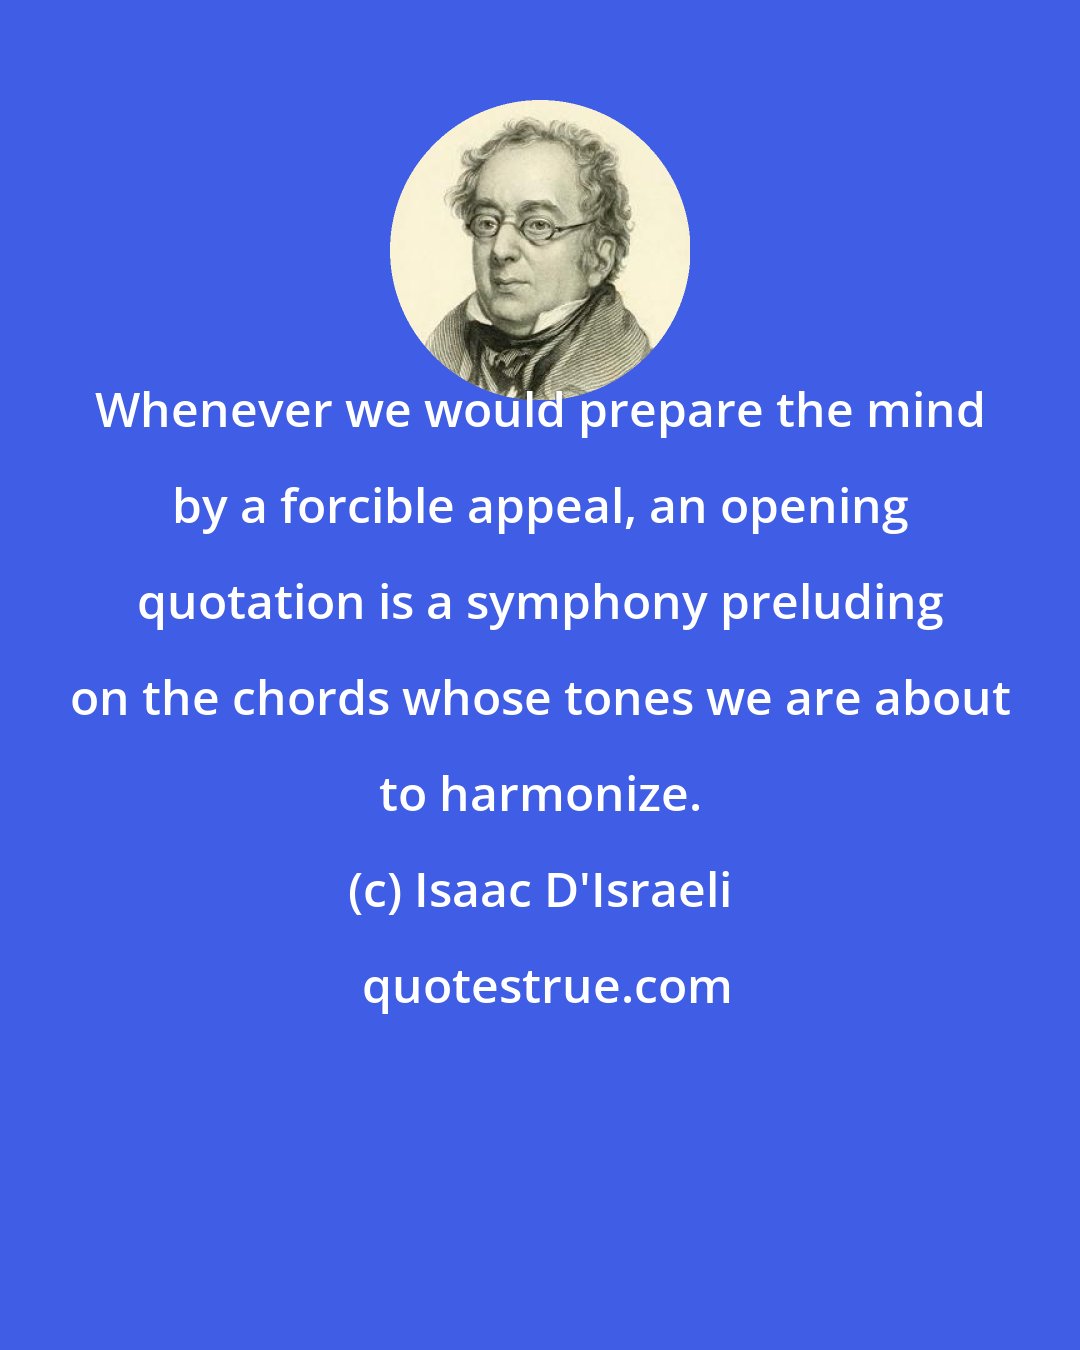 Isaac D'Israeli: Whenever we would prepare the mind by a forcible appeal, an opening quotation is a symphony preluding on the chords whose tones we are about to harmonize.